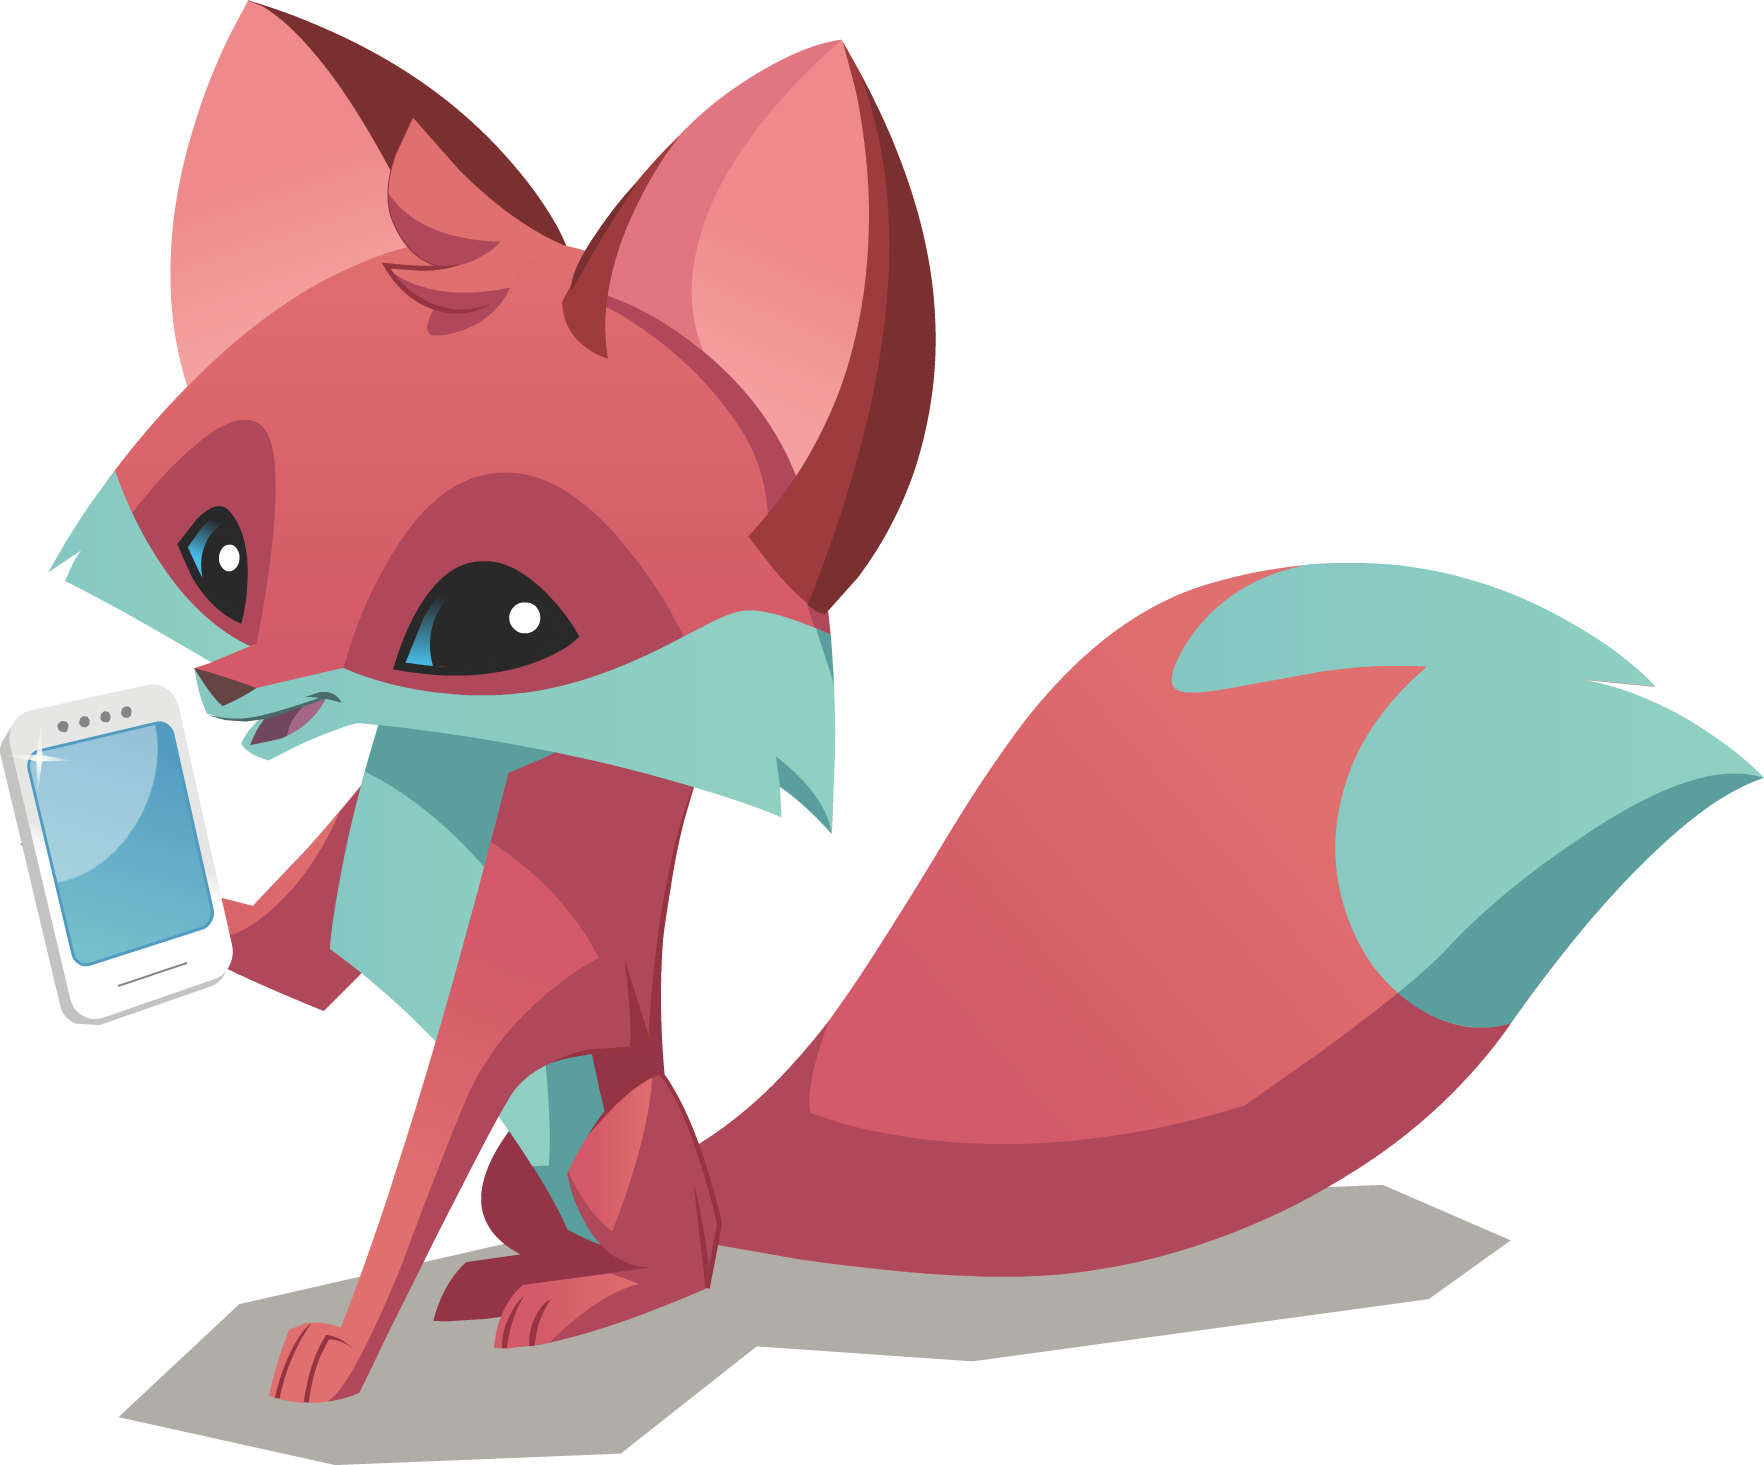 Telephone clipart ancient. Image fox phone png